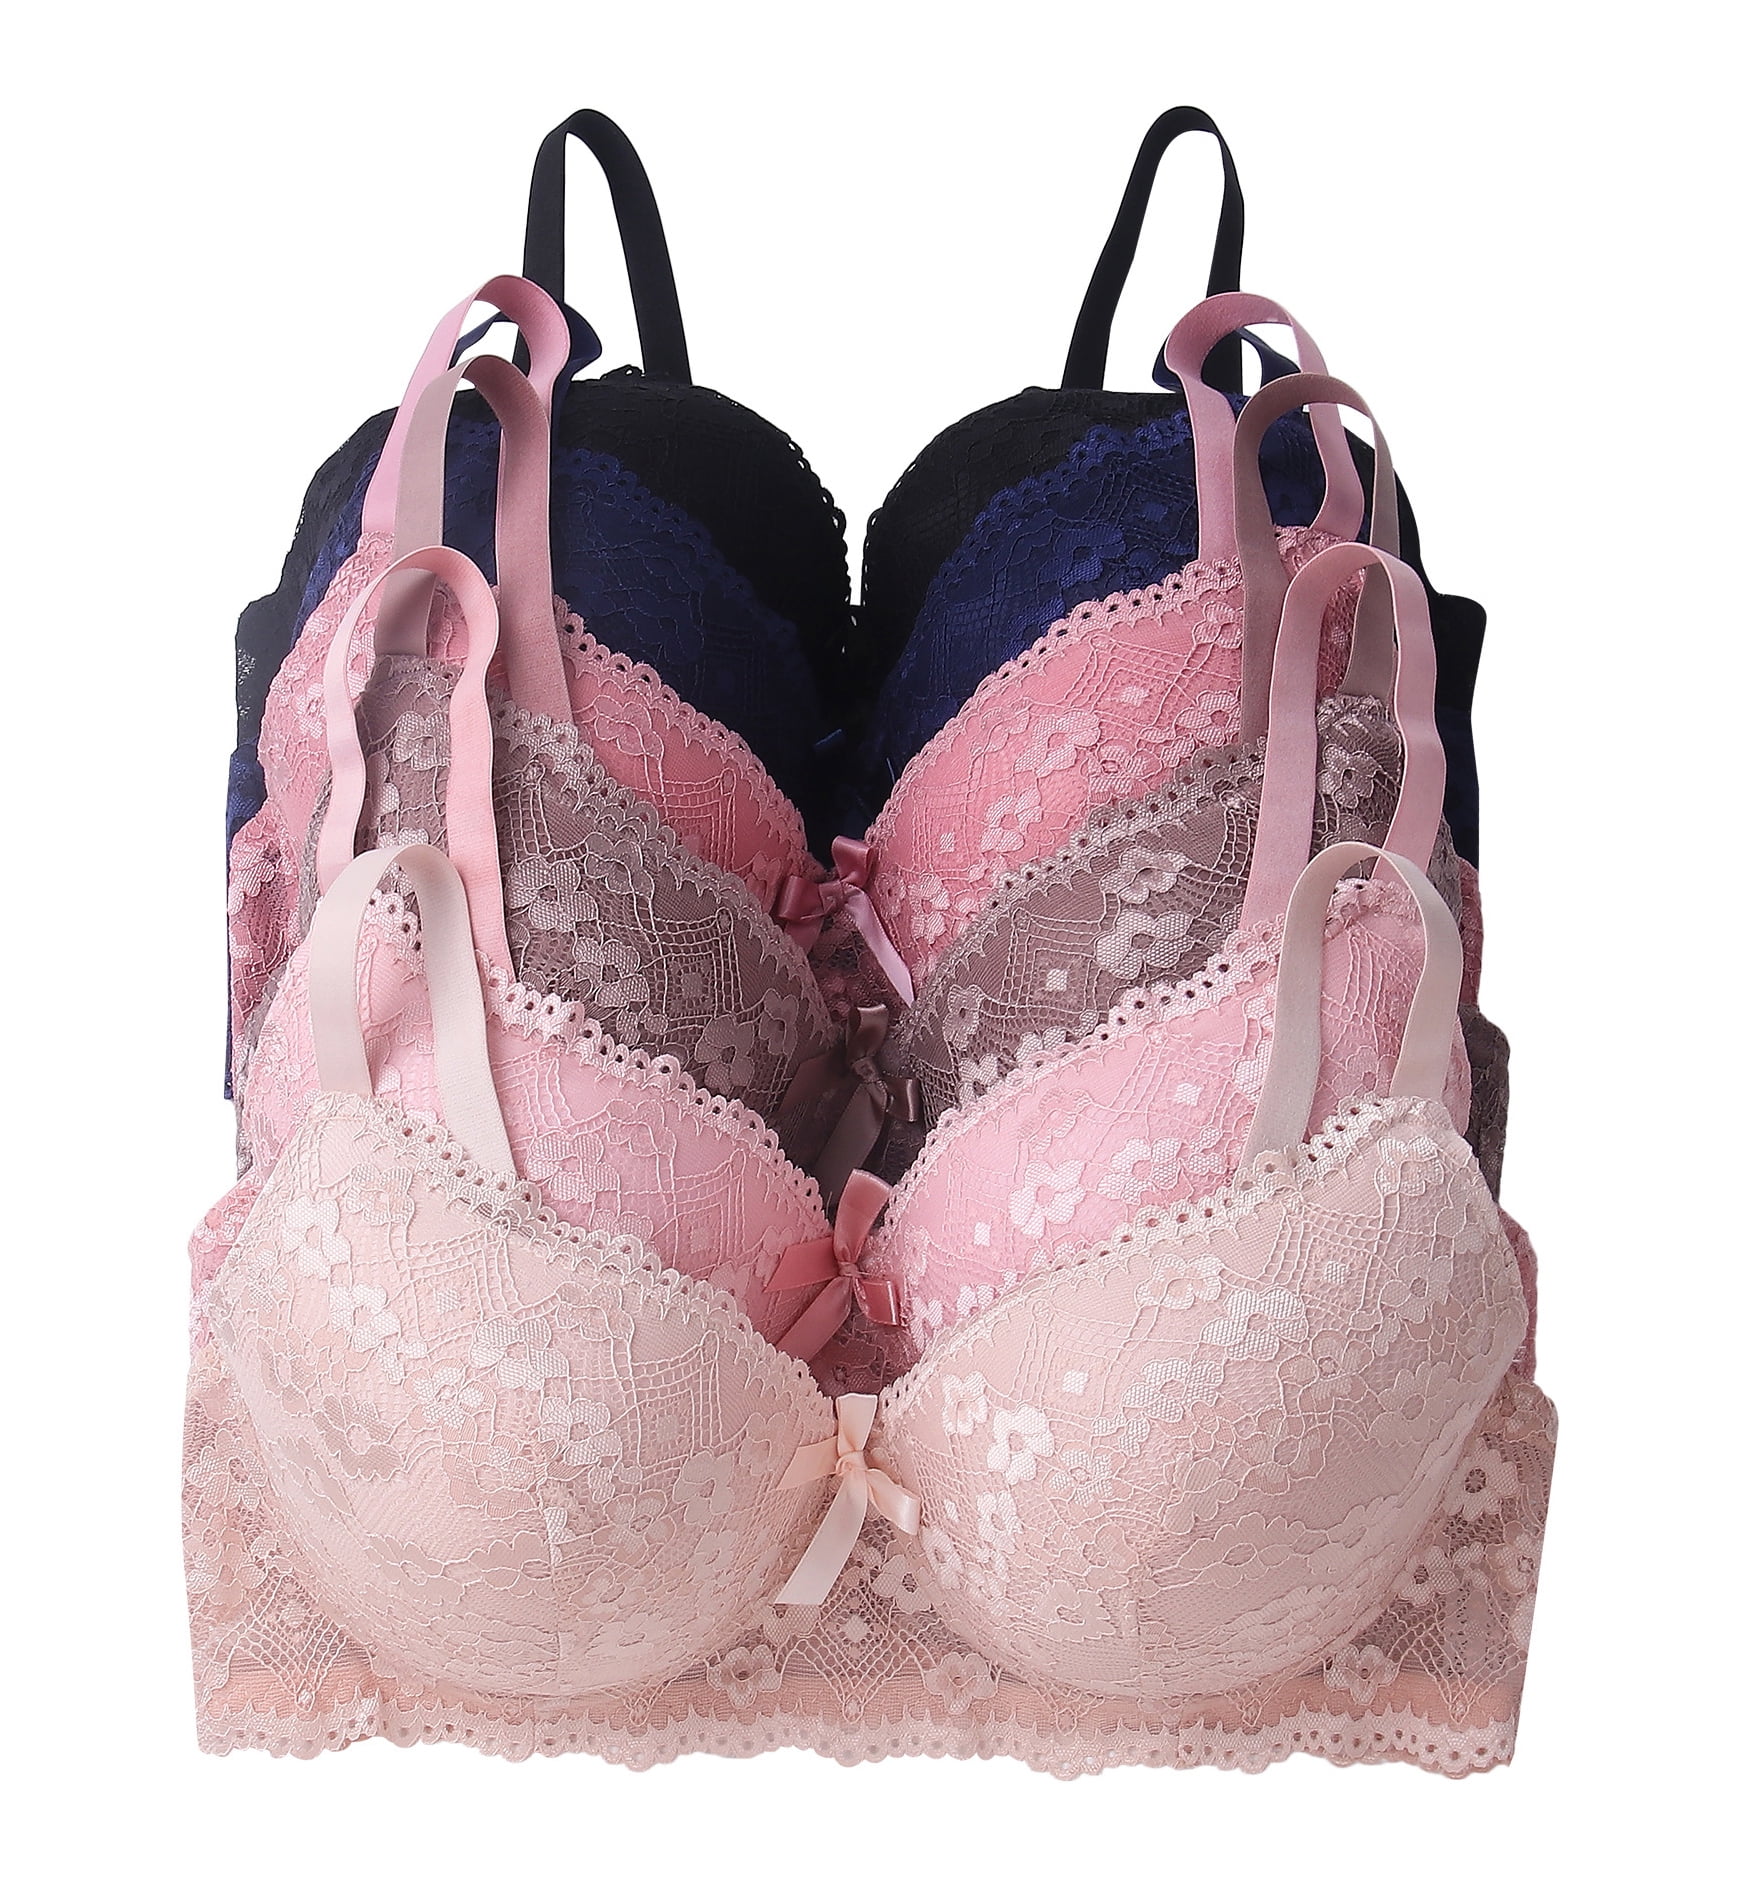 Women Bras 6 Pack of T-shirt Bra B Cup C Cup D Cup DD Cup DDD Cup 36D  (S8280)